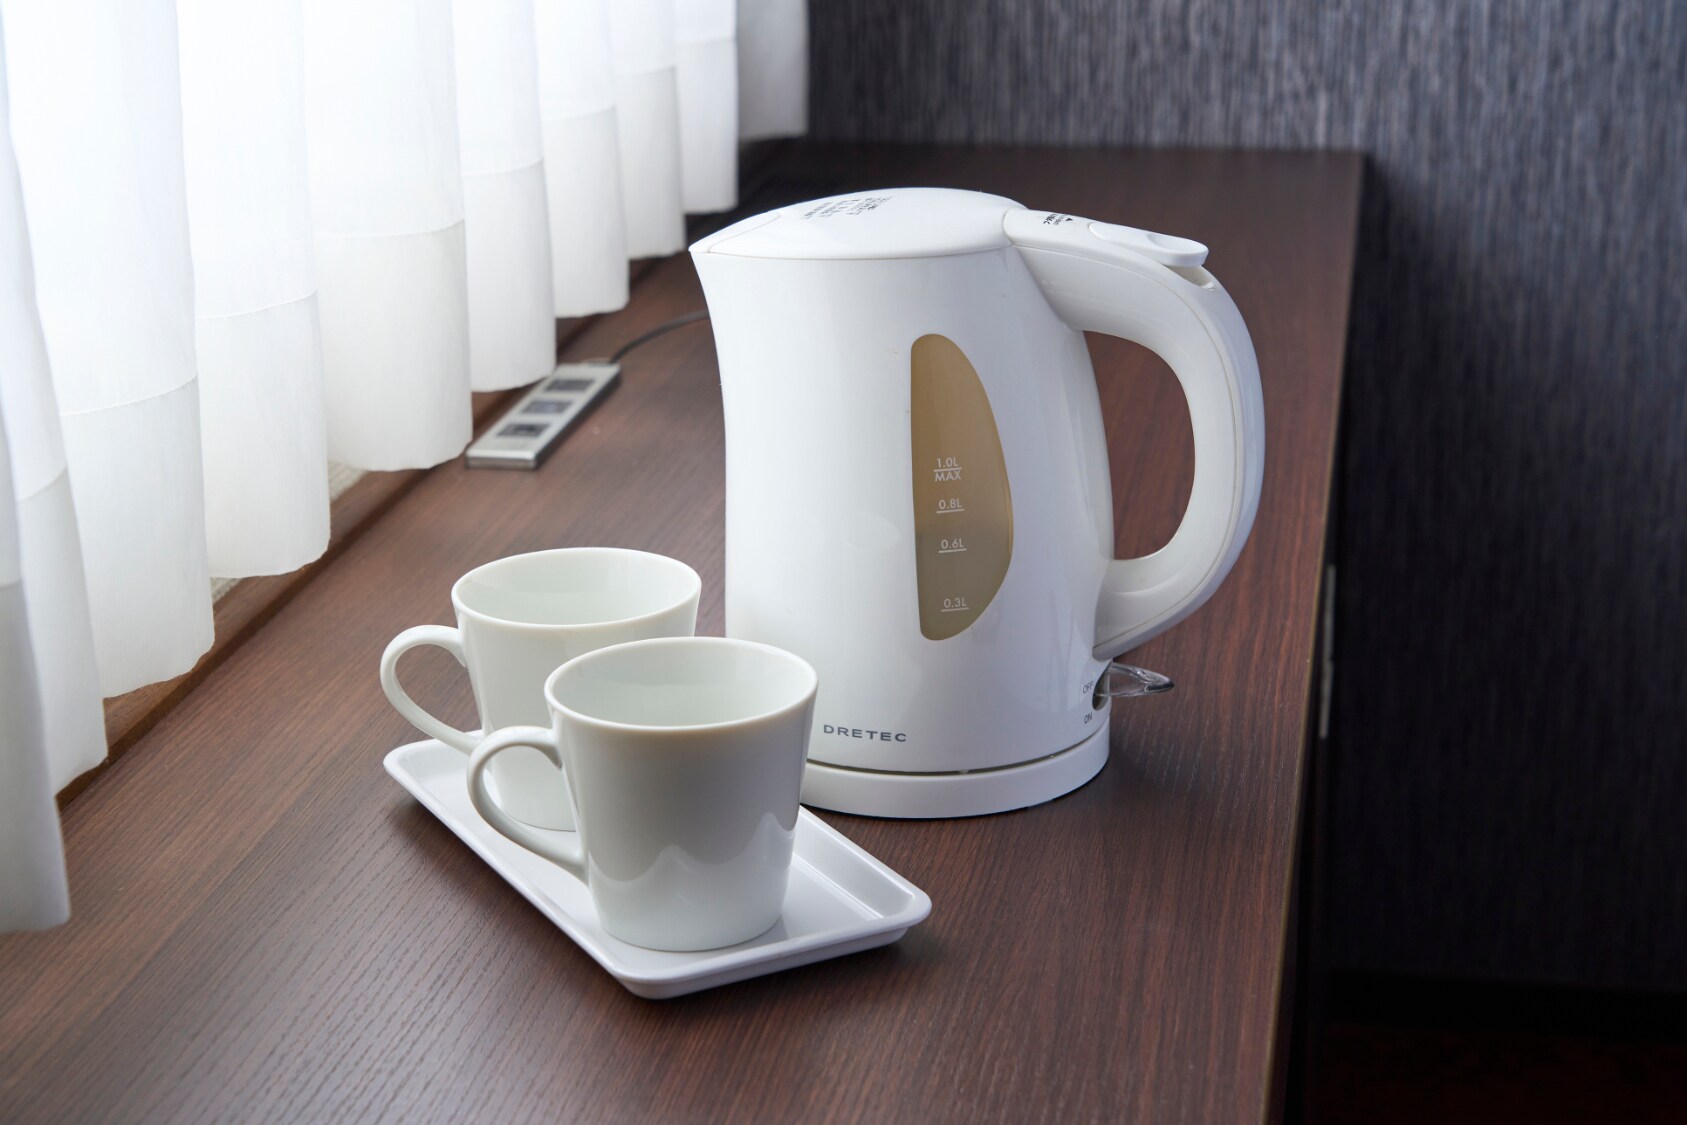 Room equipment: Kettle Cup